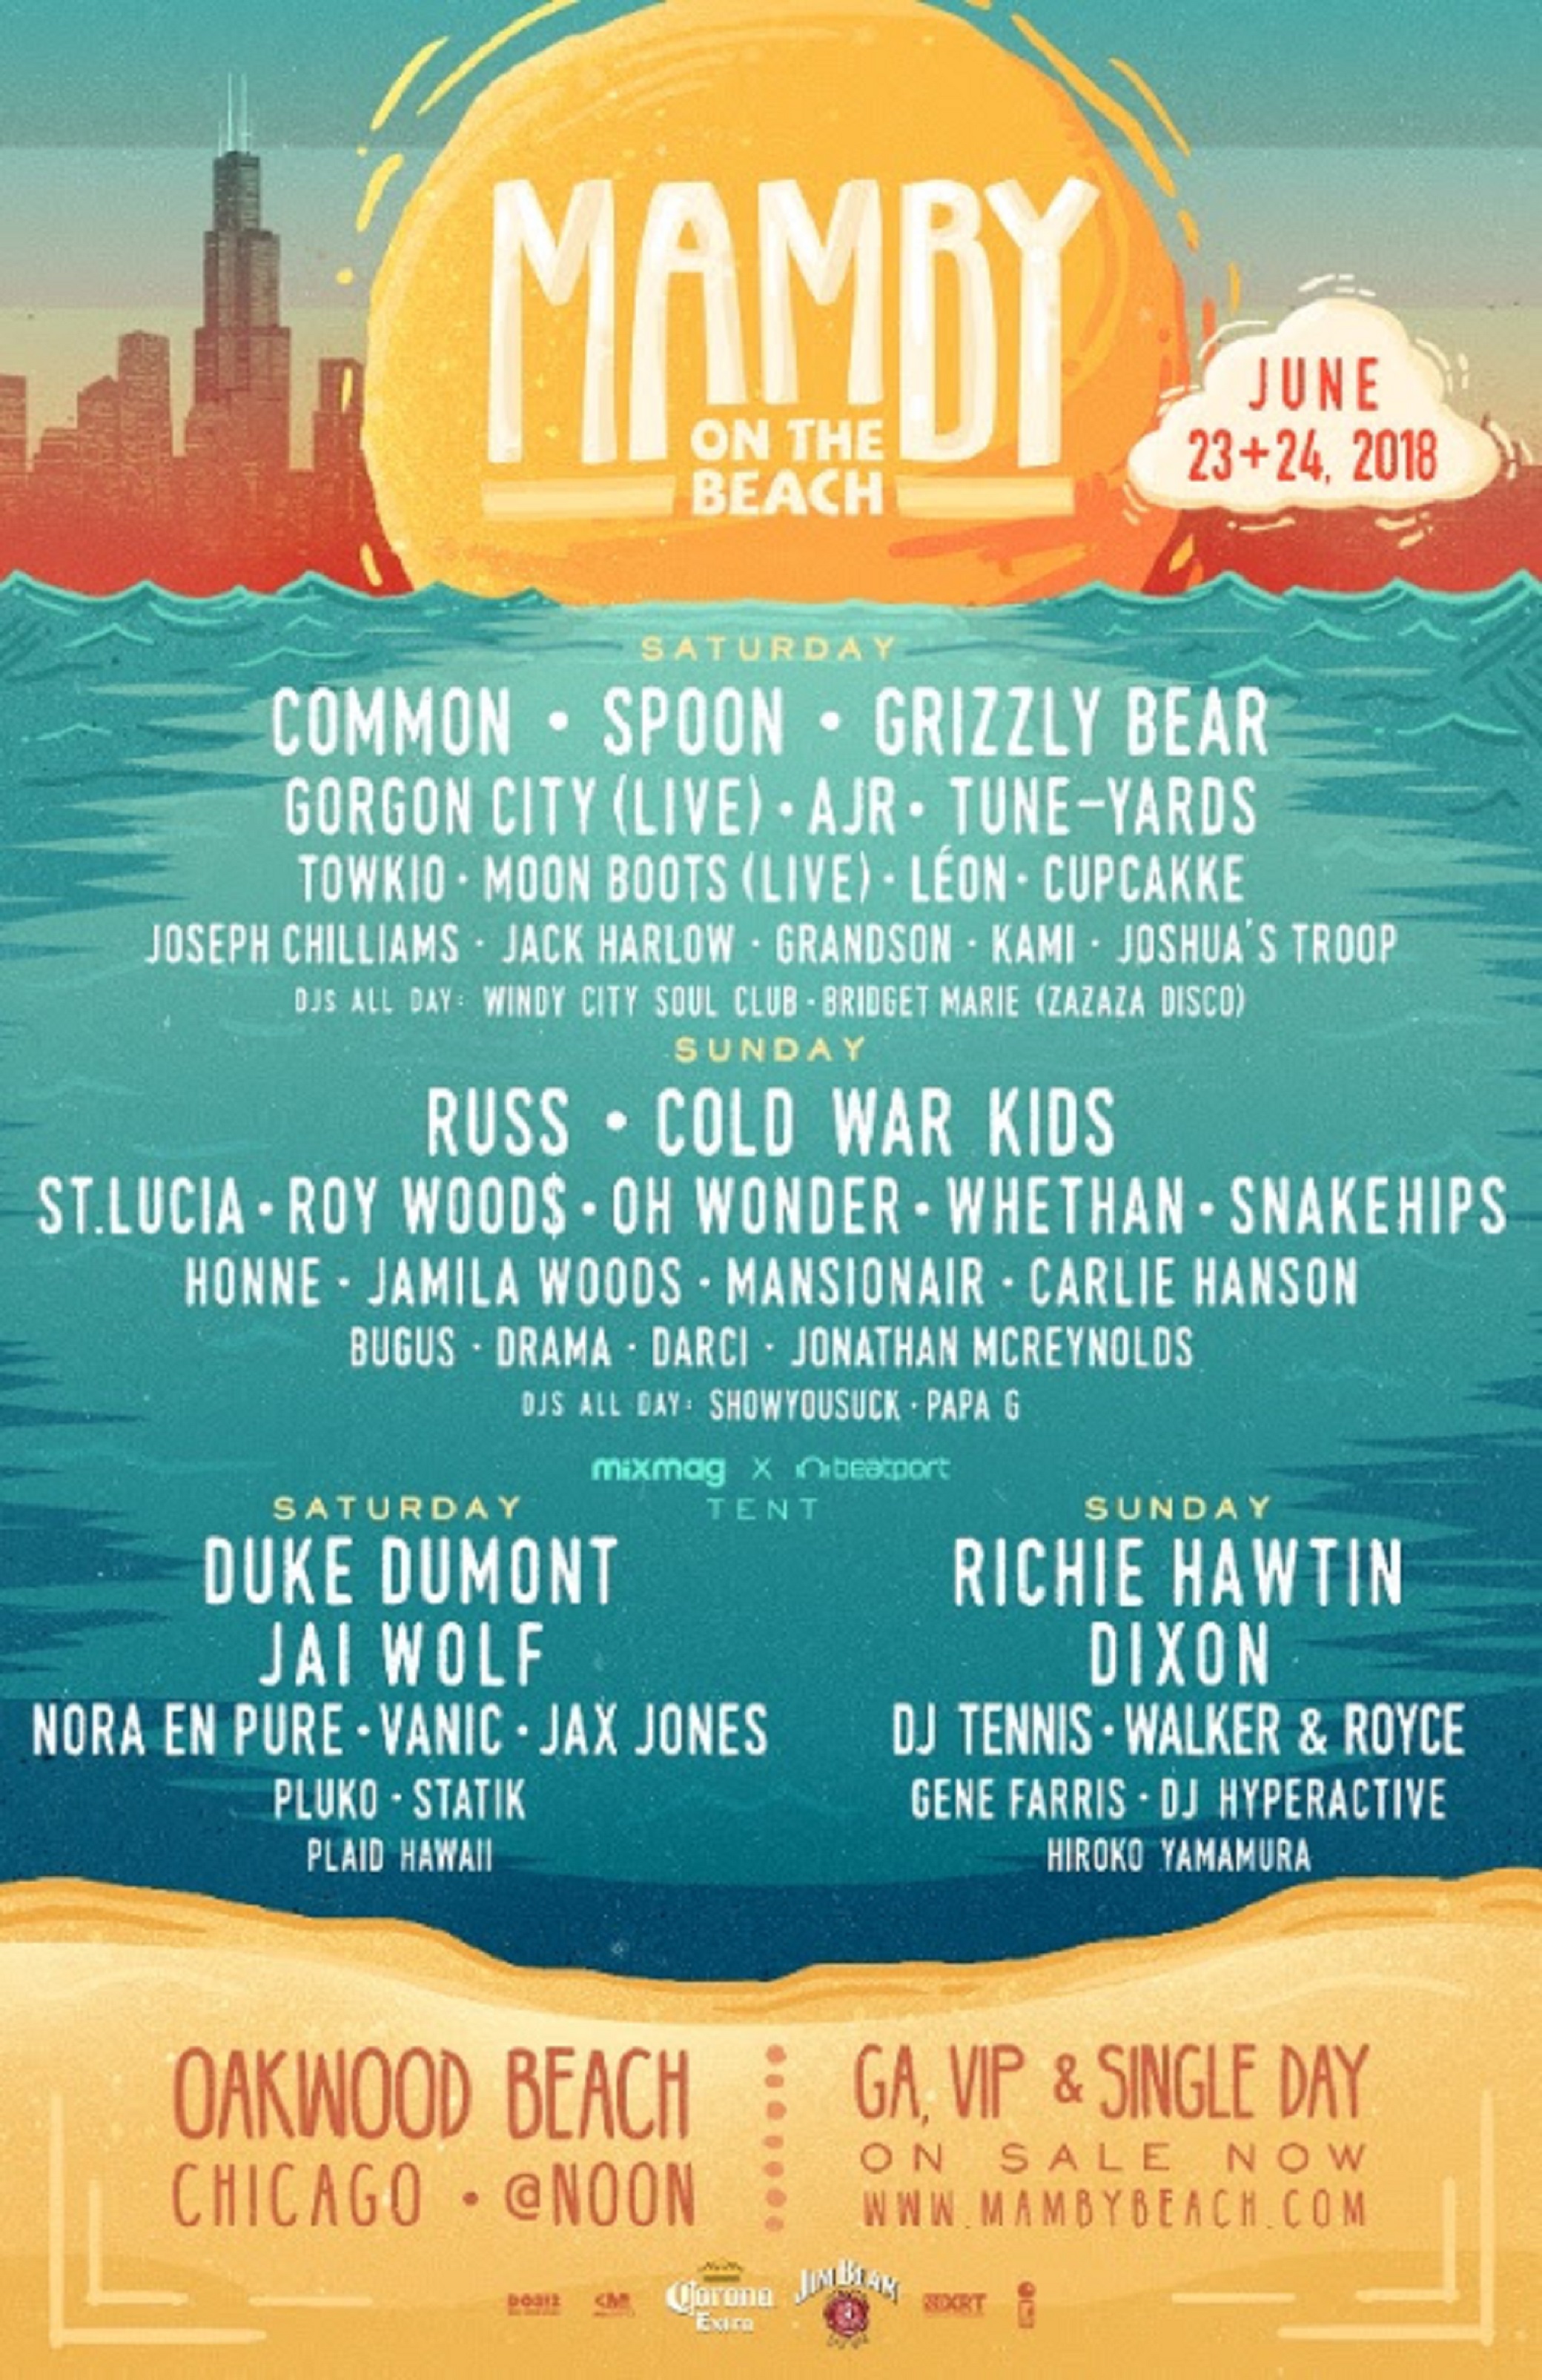 Mamby On The Beach Announces Full 2018 Lineup